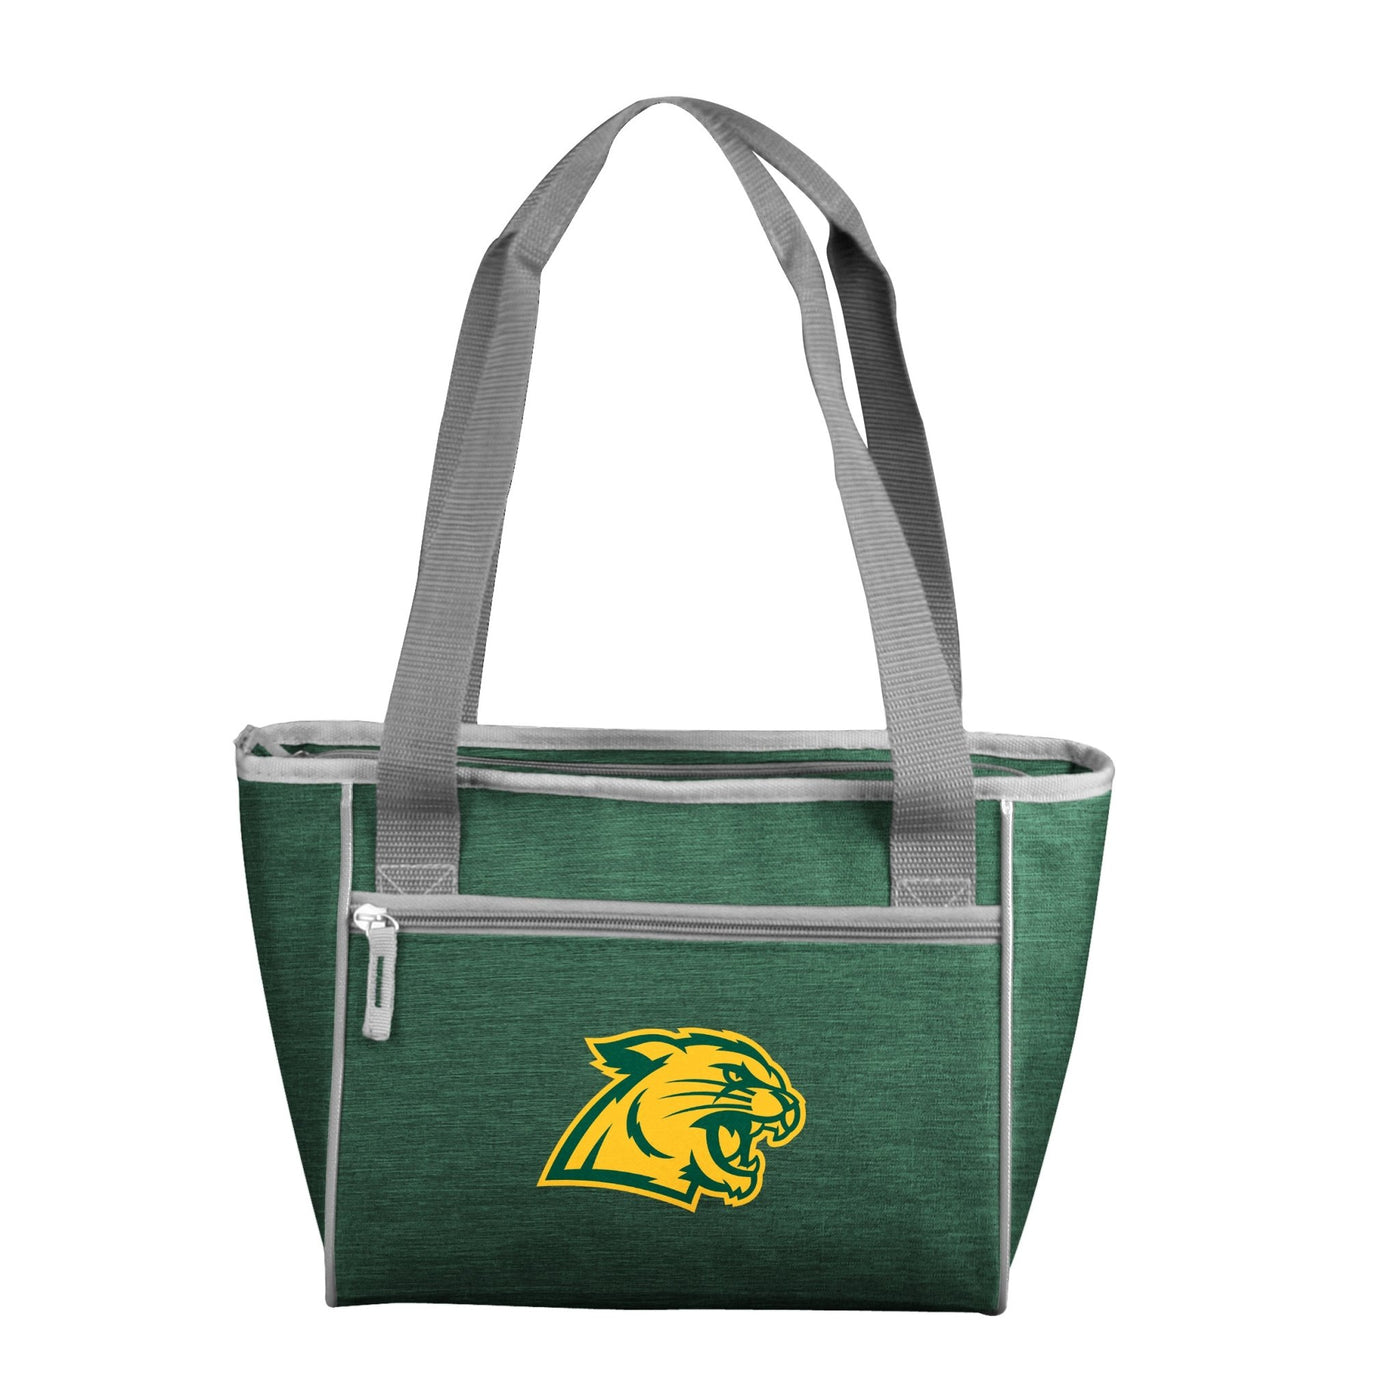 Northern Michigan Crosshatch 16 Can Cooler Tote - Logo Brands